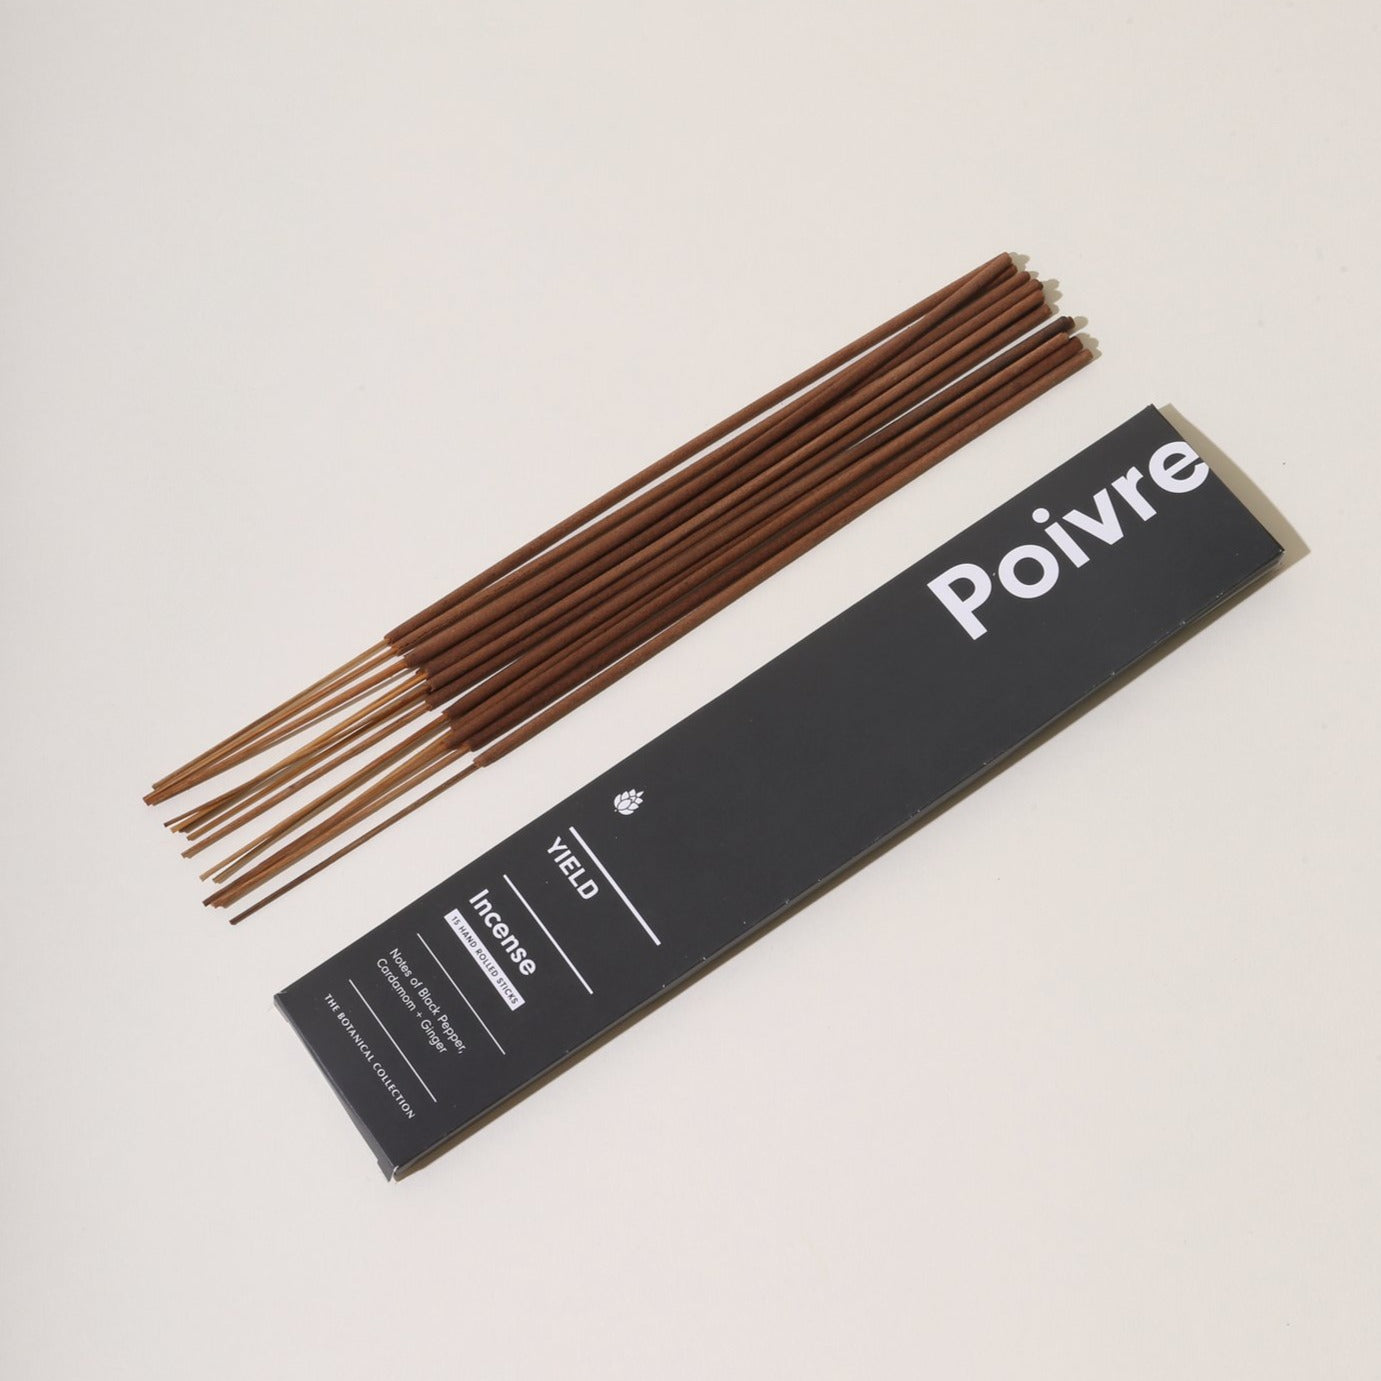 YIELD Poivre Incense, by Lou-Lou's Flower Truck